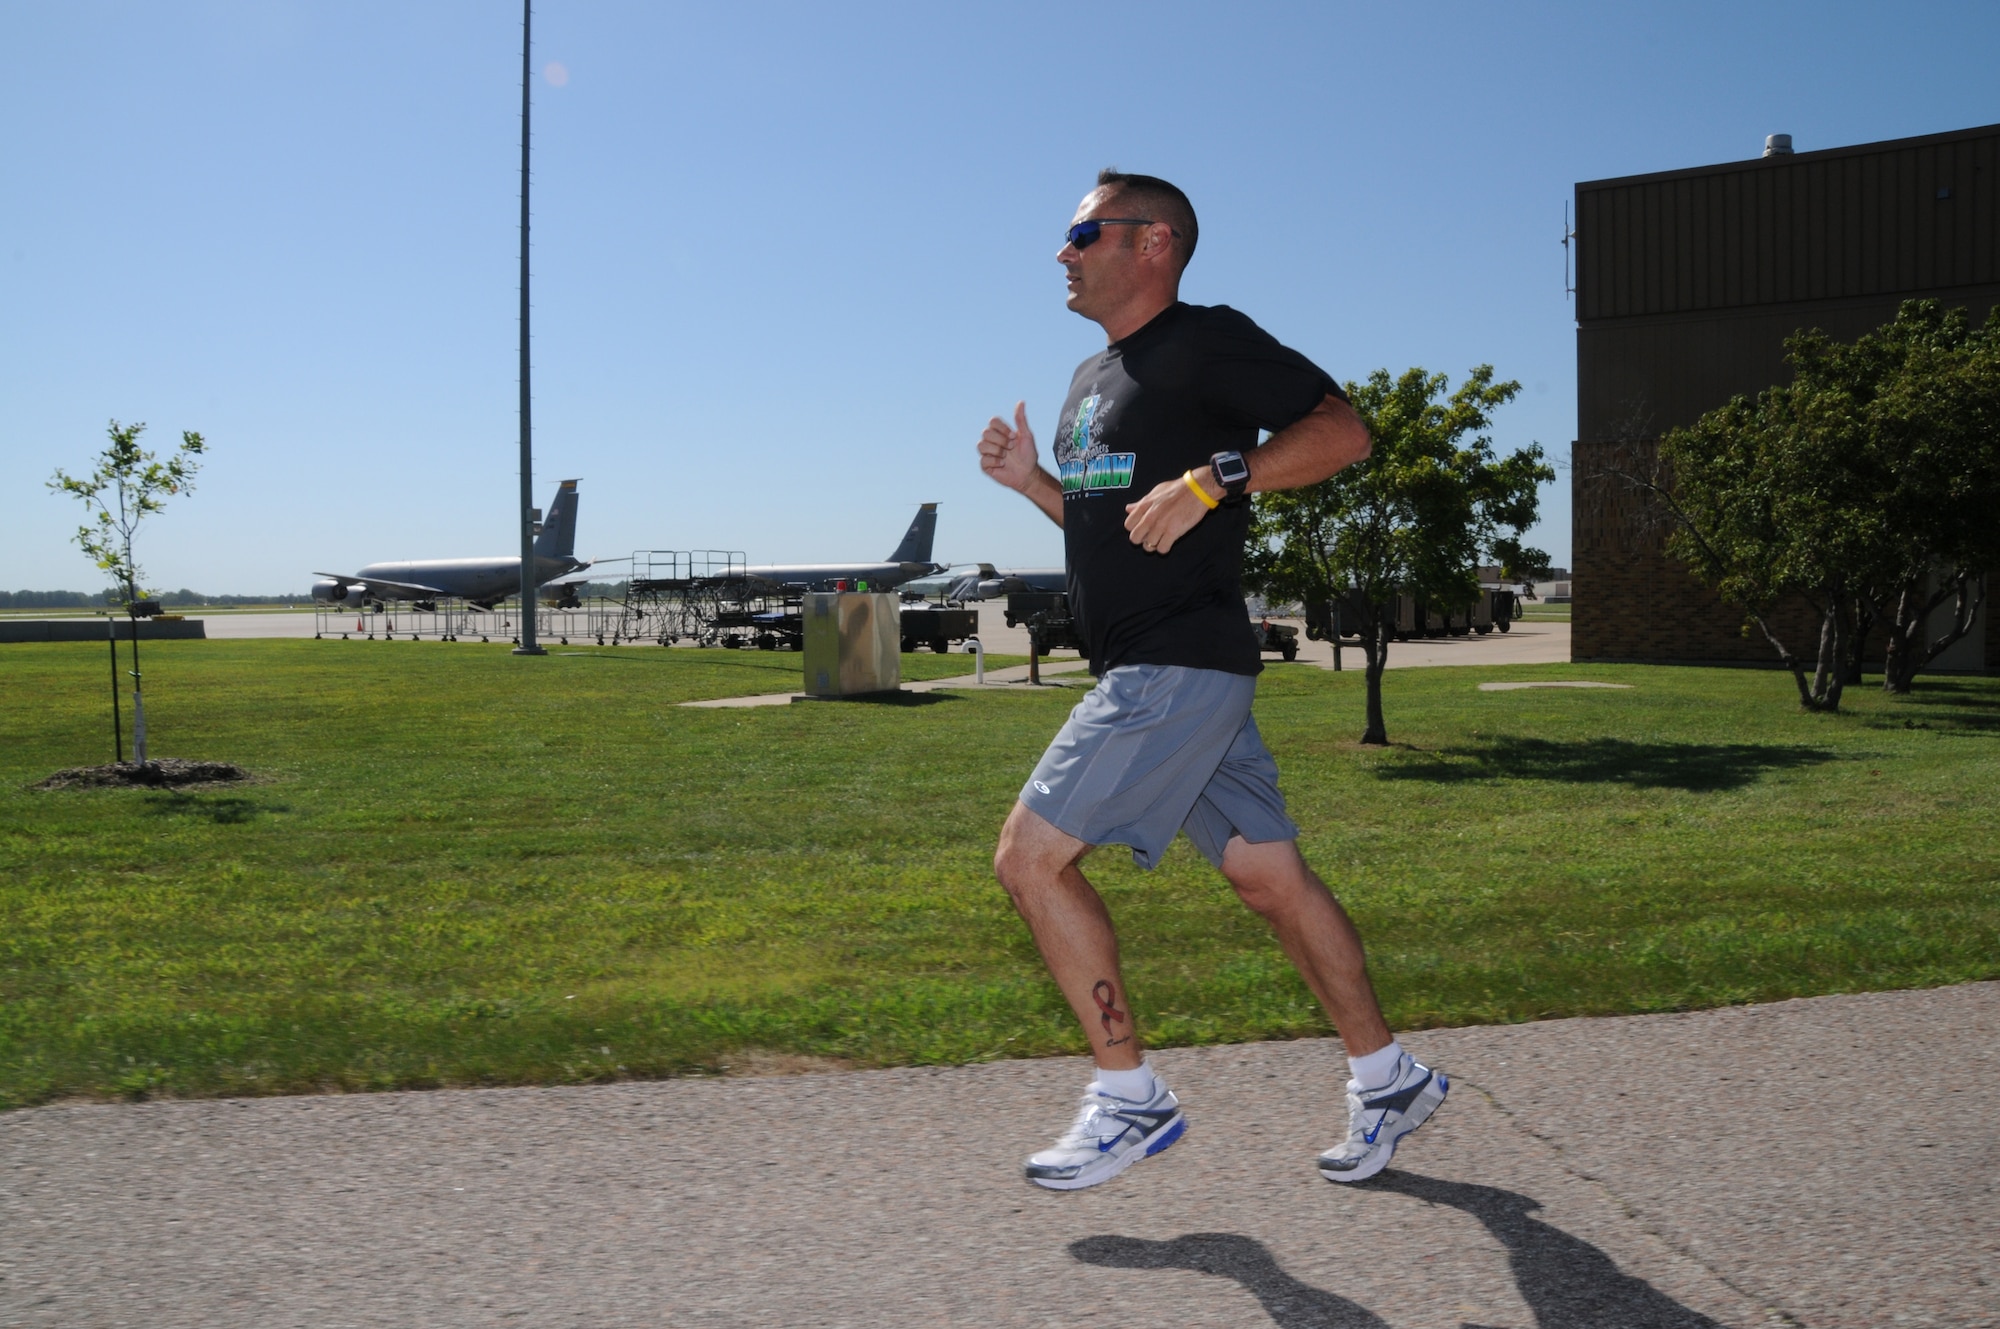 Master Sergeant Marty Hogan runs along the flight line at the Sioux City, Iowa Air National Guard Base.  Hogan, a staff accountant at the 185th Air Refueling Wing, wears a pink ribbon tattoo on his leg in honor of his wife's battle with cancer.
USAF Photo: Master Sgt Vincent De Groot 185th ARW Public Affairs Manager

